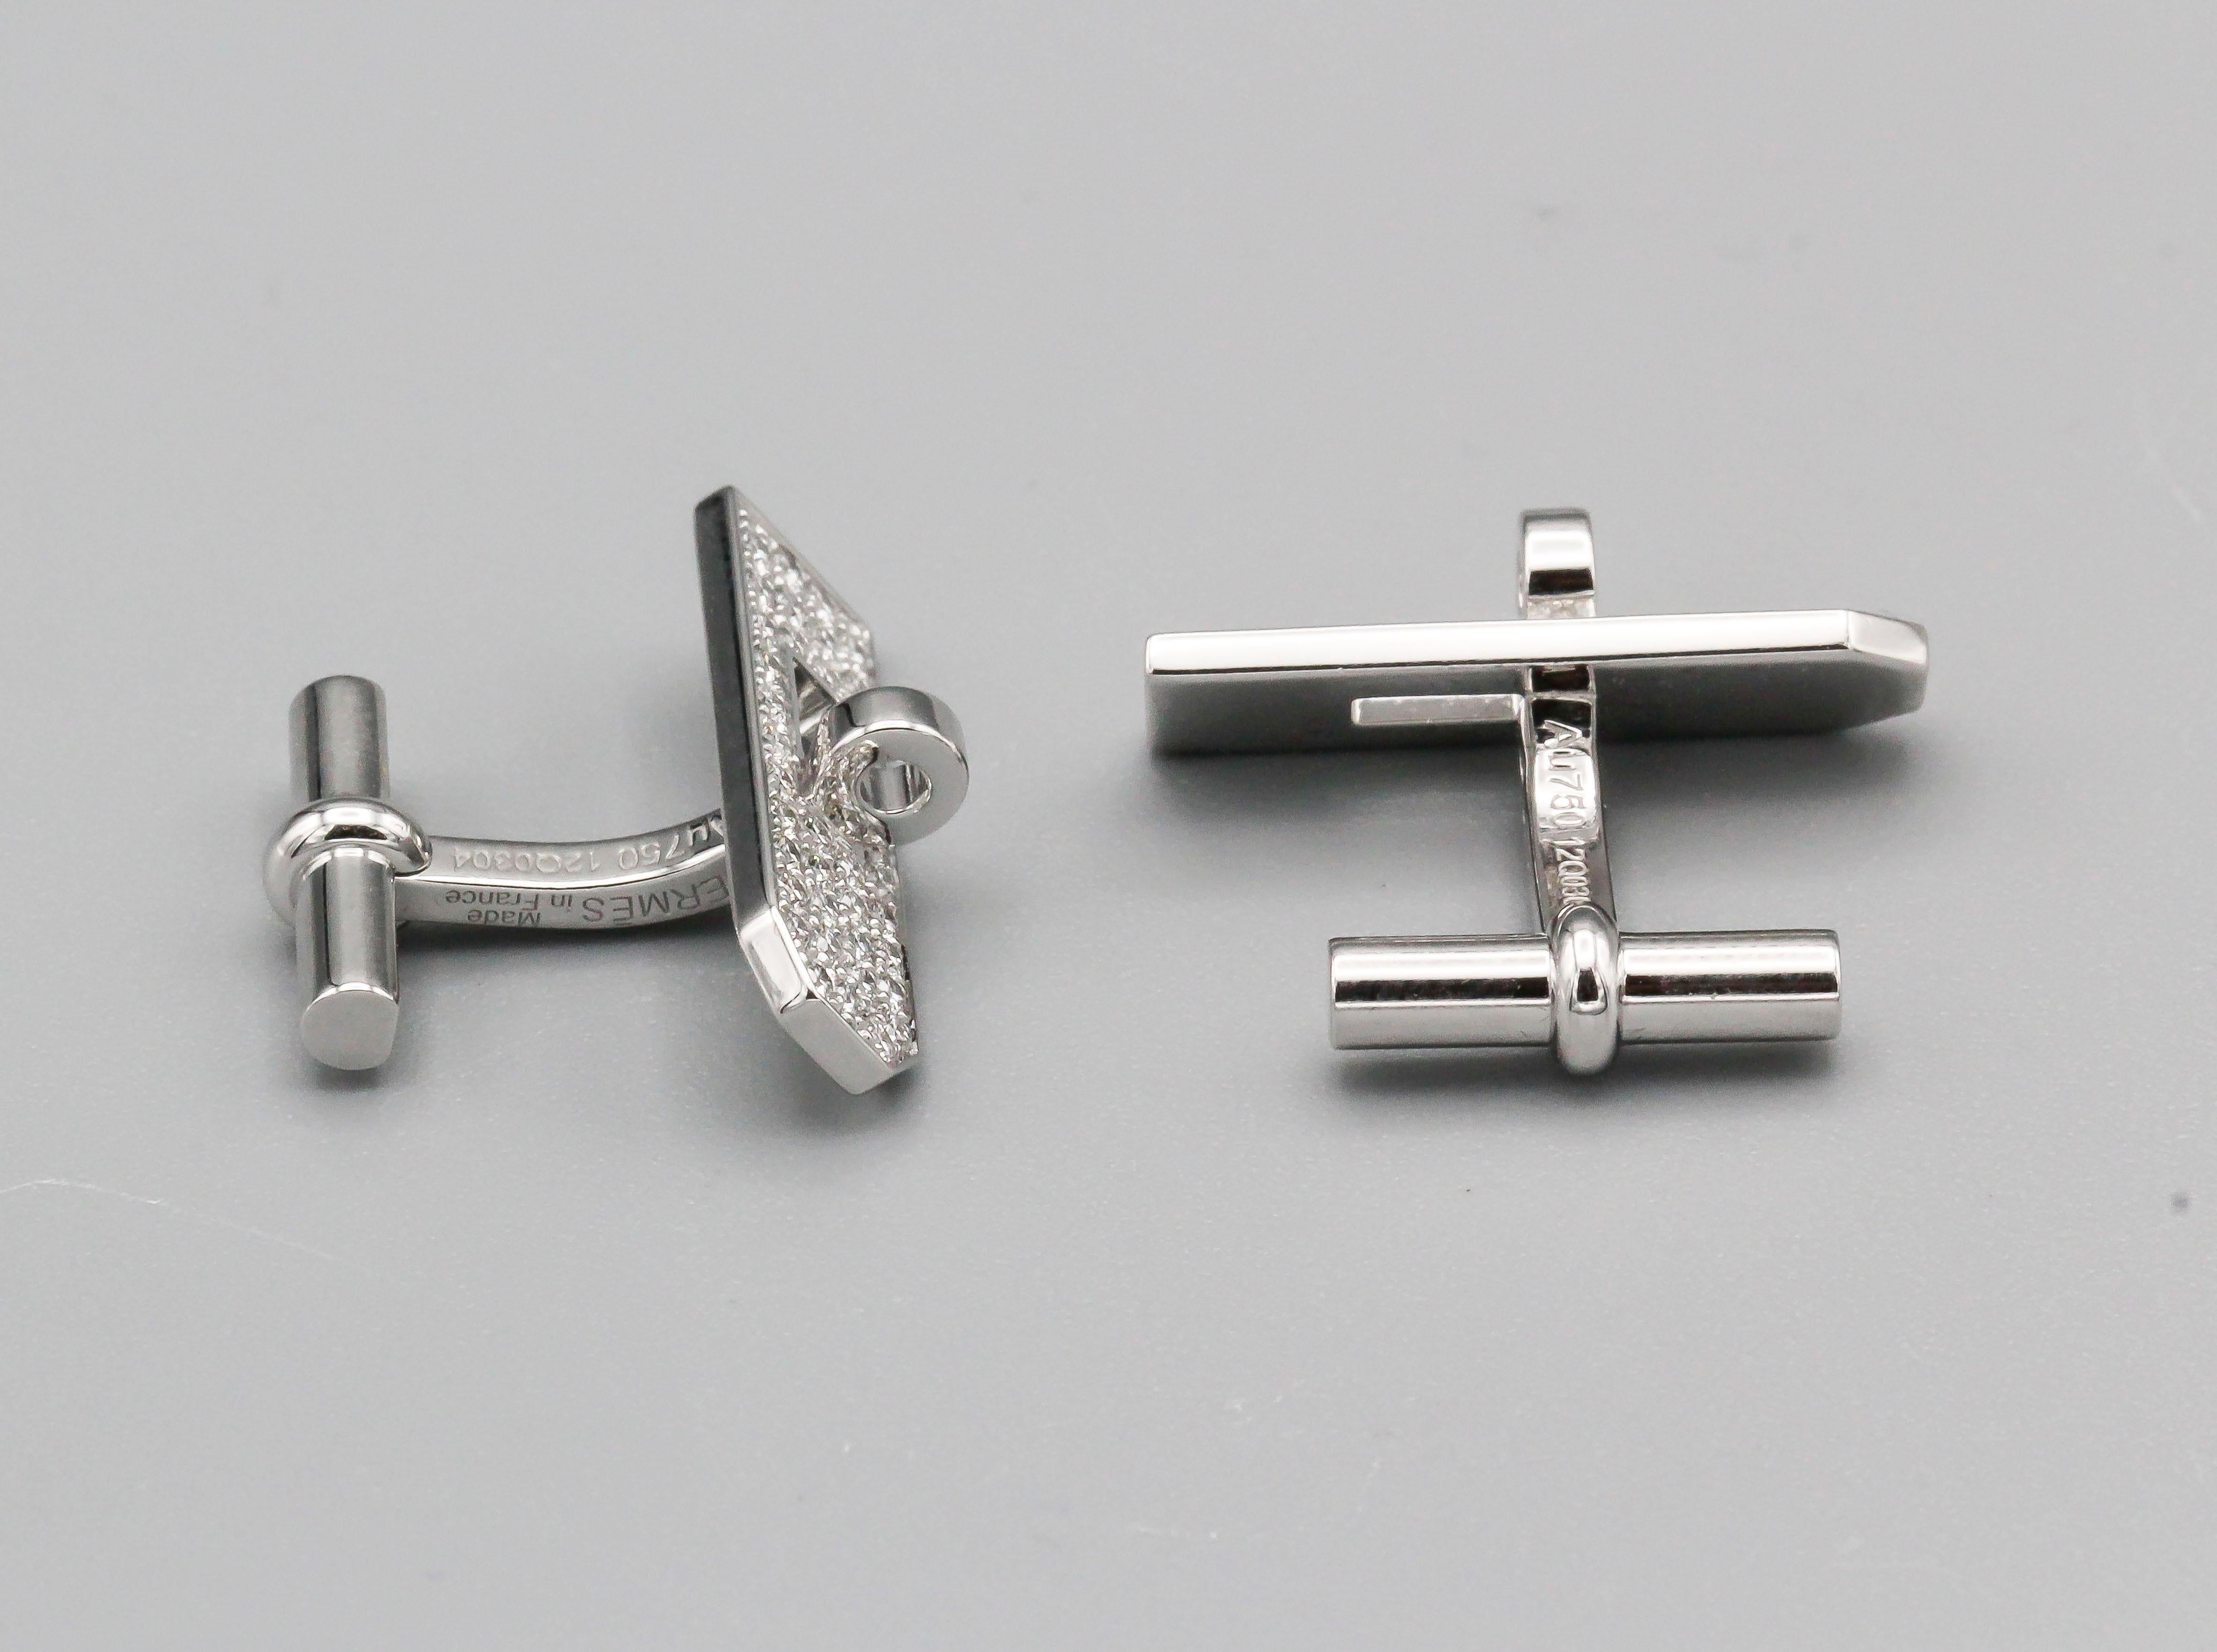 Very fine and rare 18K white gold cufflinks with pave diamonds from the 